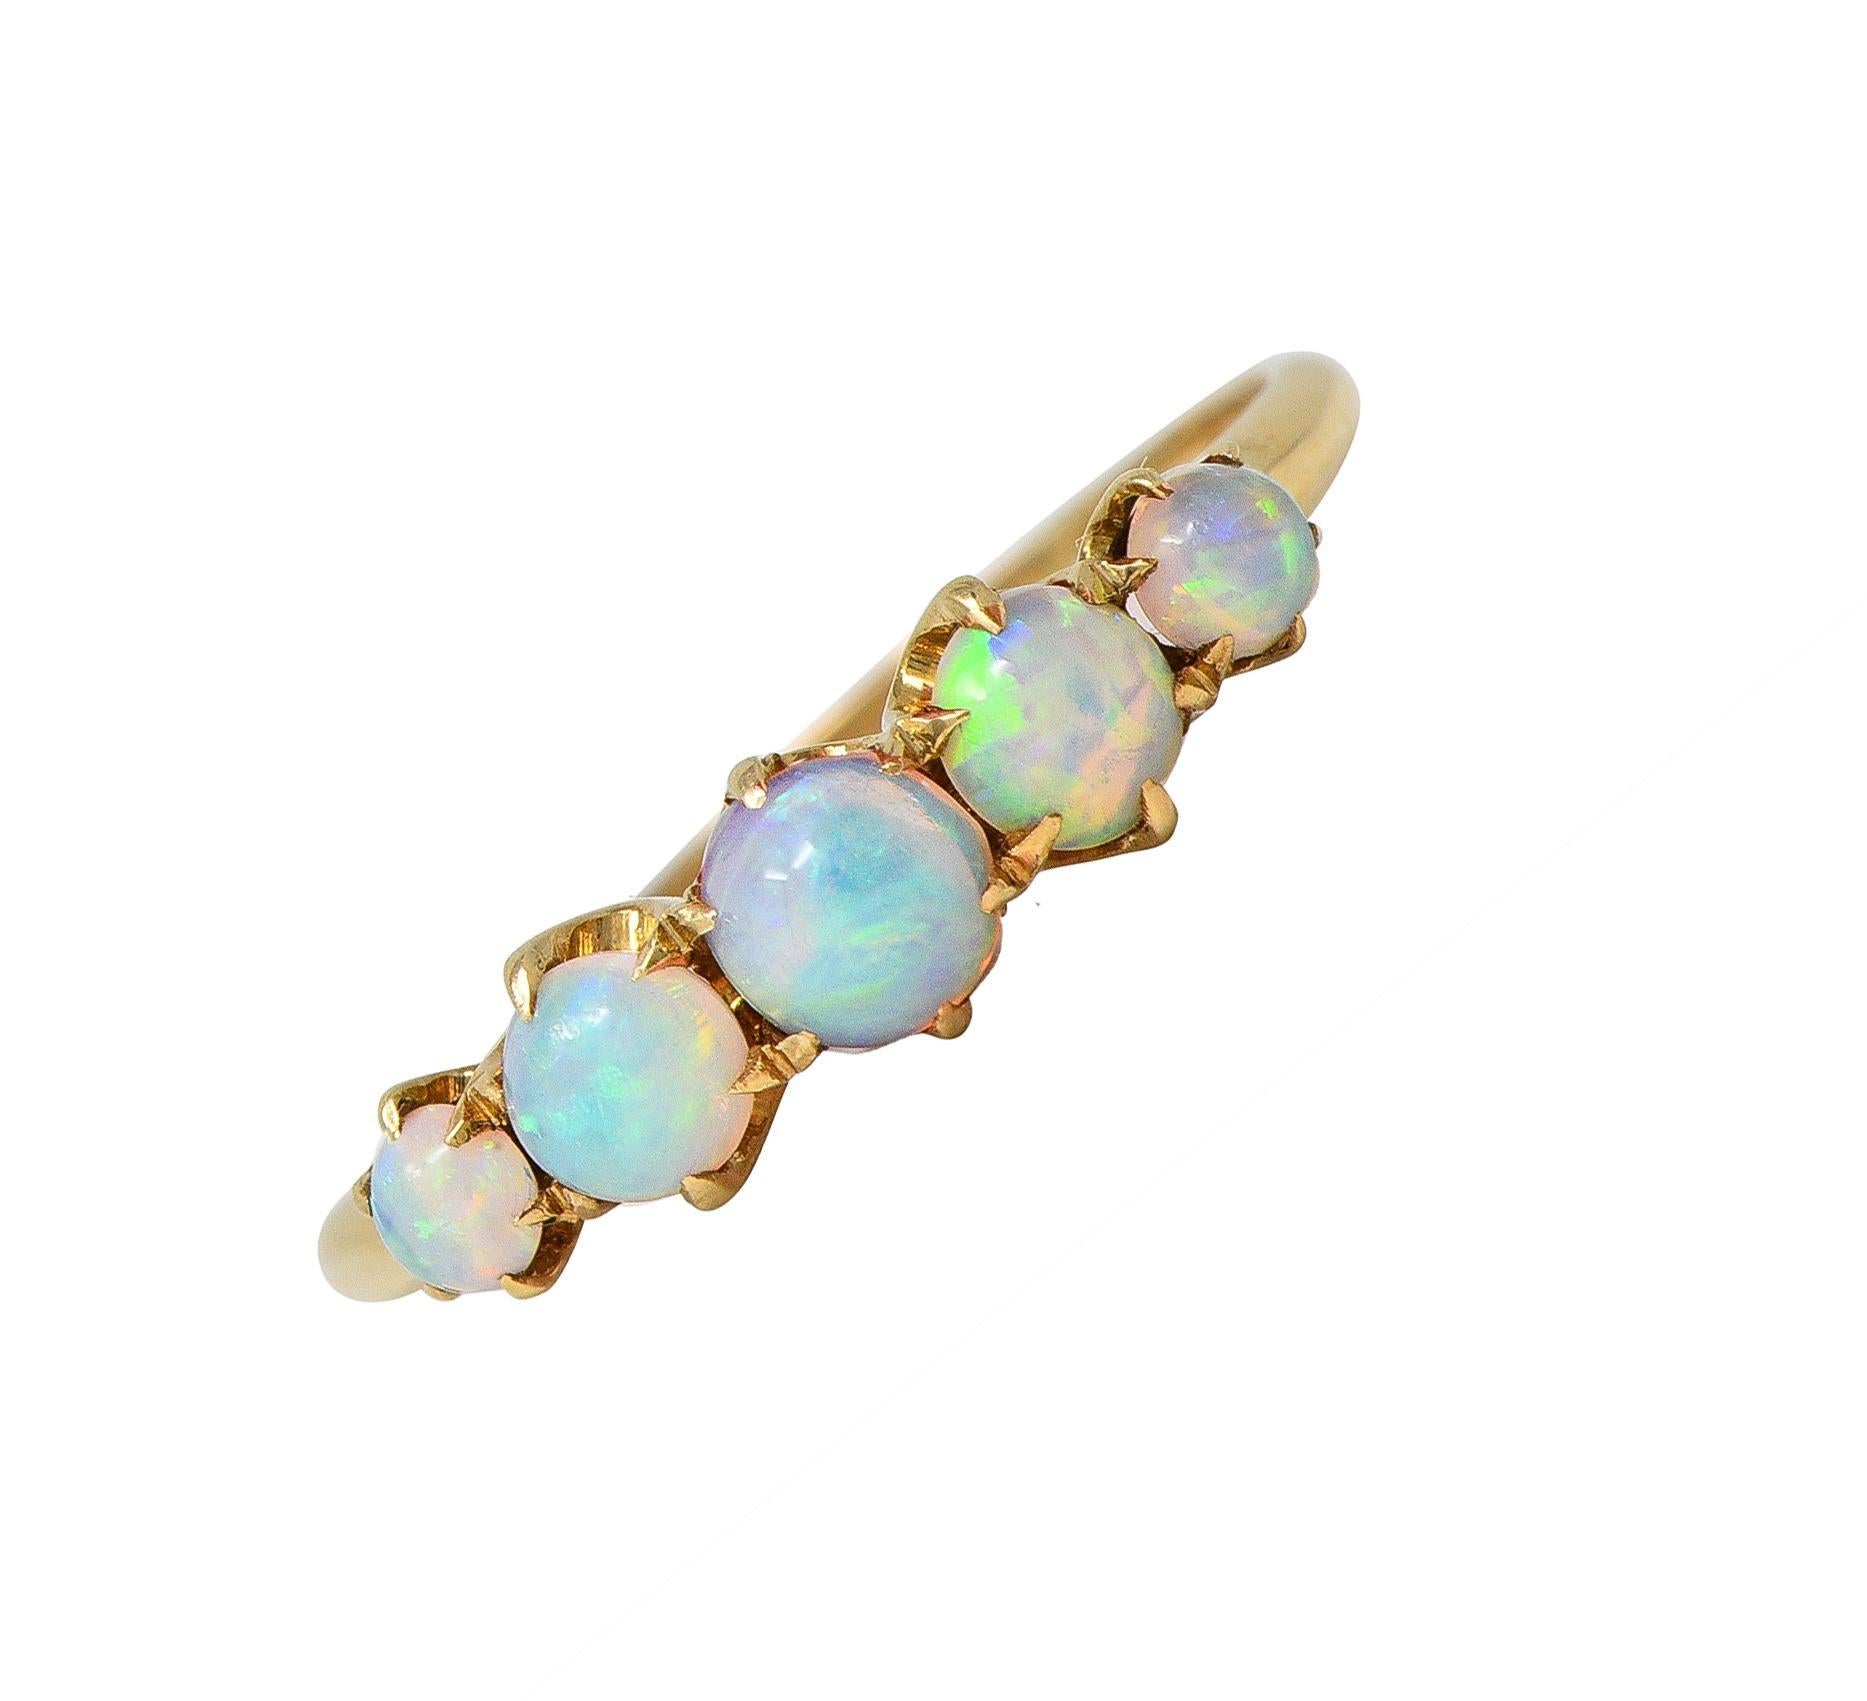 Featuring five round-shaped opal cabochons set with talon prongs set east to west
Graduated and ranging in size from 3.0 to 4.5 mm round 
Translucent white with spectral play-of-color
Stamped for 14 karat gold
With maker's mark for Larter &